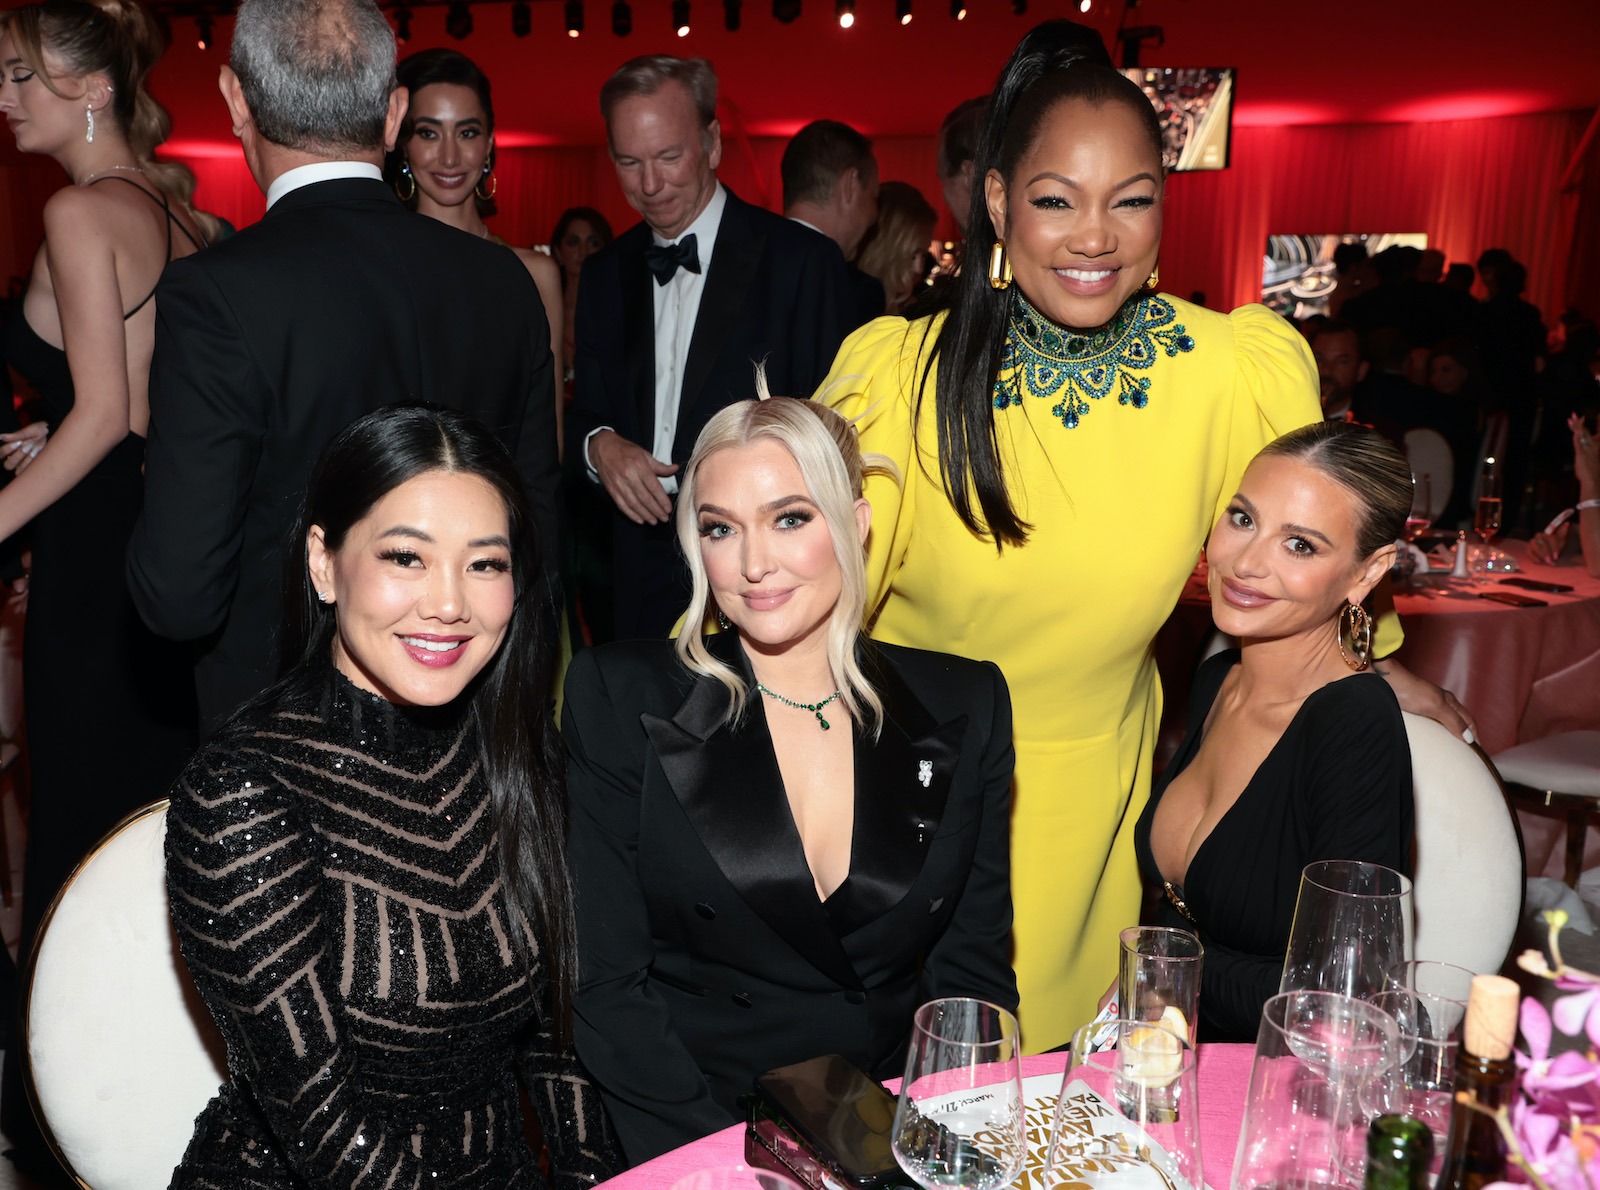 Crystal Kung, Erika Jayne, Garcelle Beauvais, and Dorit Kemsley from 'rHOBH' gather for a photo at the Elton John AIDS Foundation's 30th Annual Academy Awards Viewing Party 